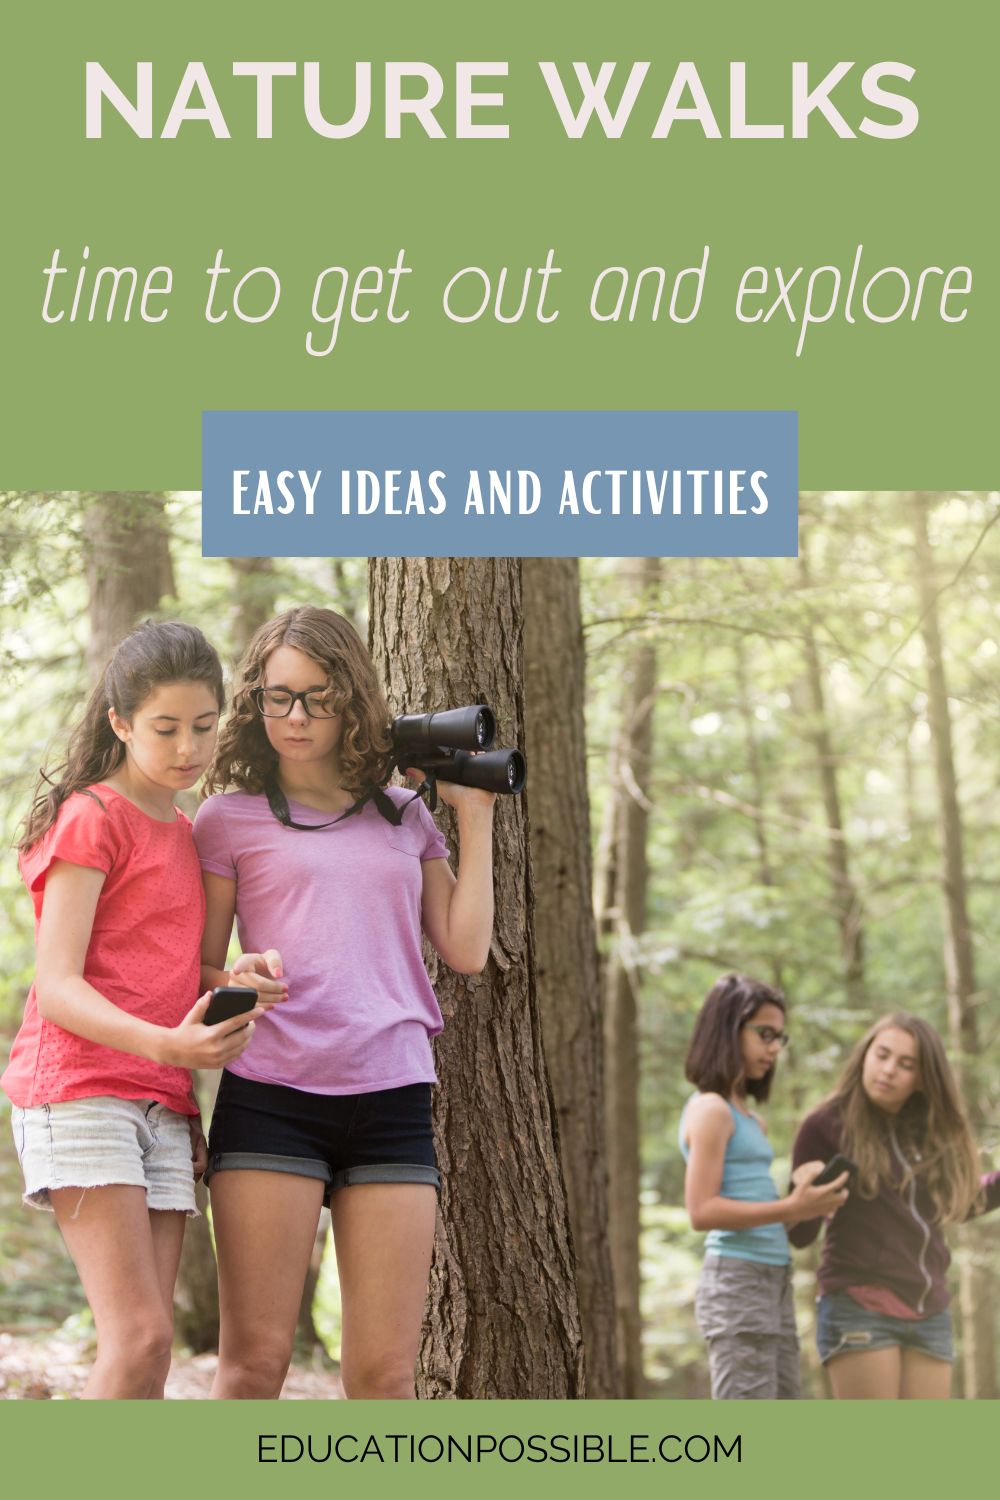 4 tween girls are in 2 pairs standing next to large trees exploring nature, wearing shorts and short sleeves. One of each pair is holding binoculars and the others are holding cell phones.